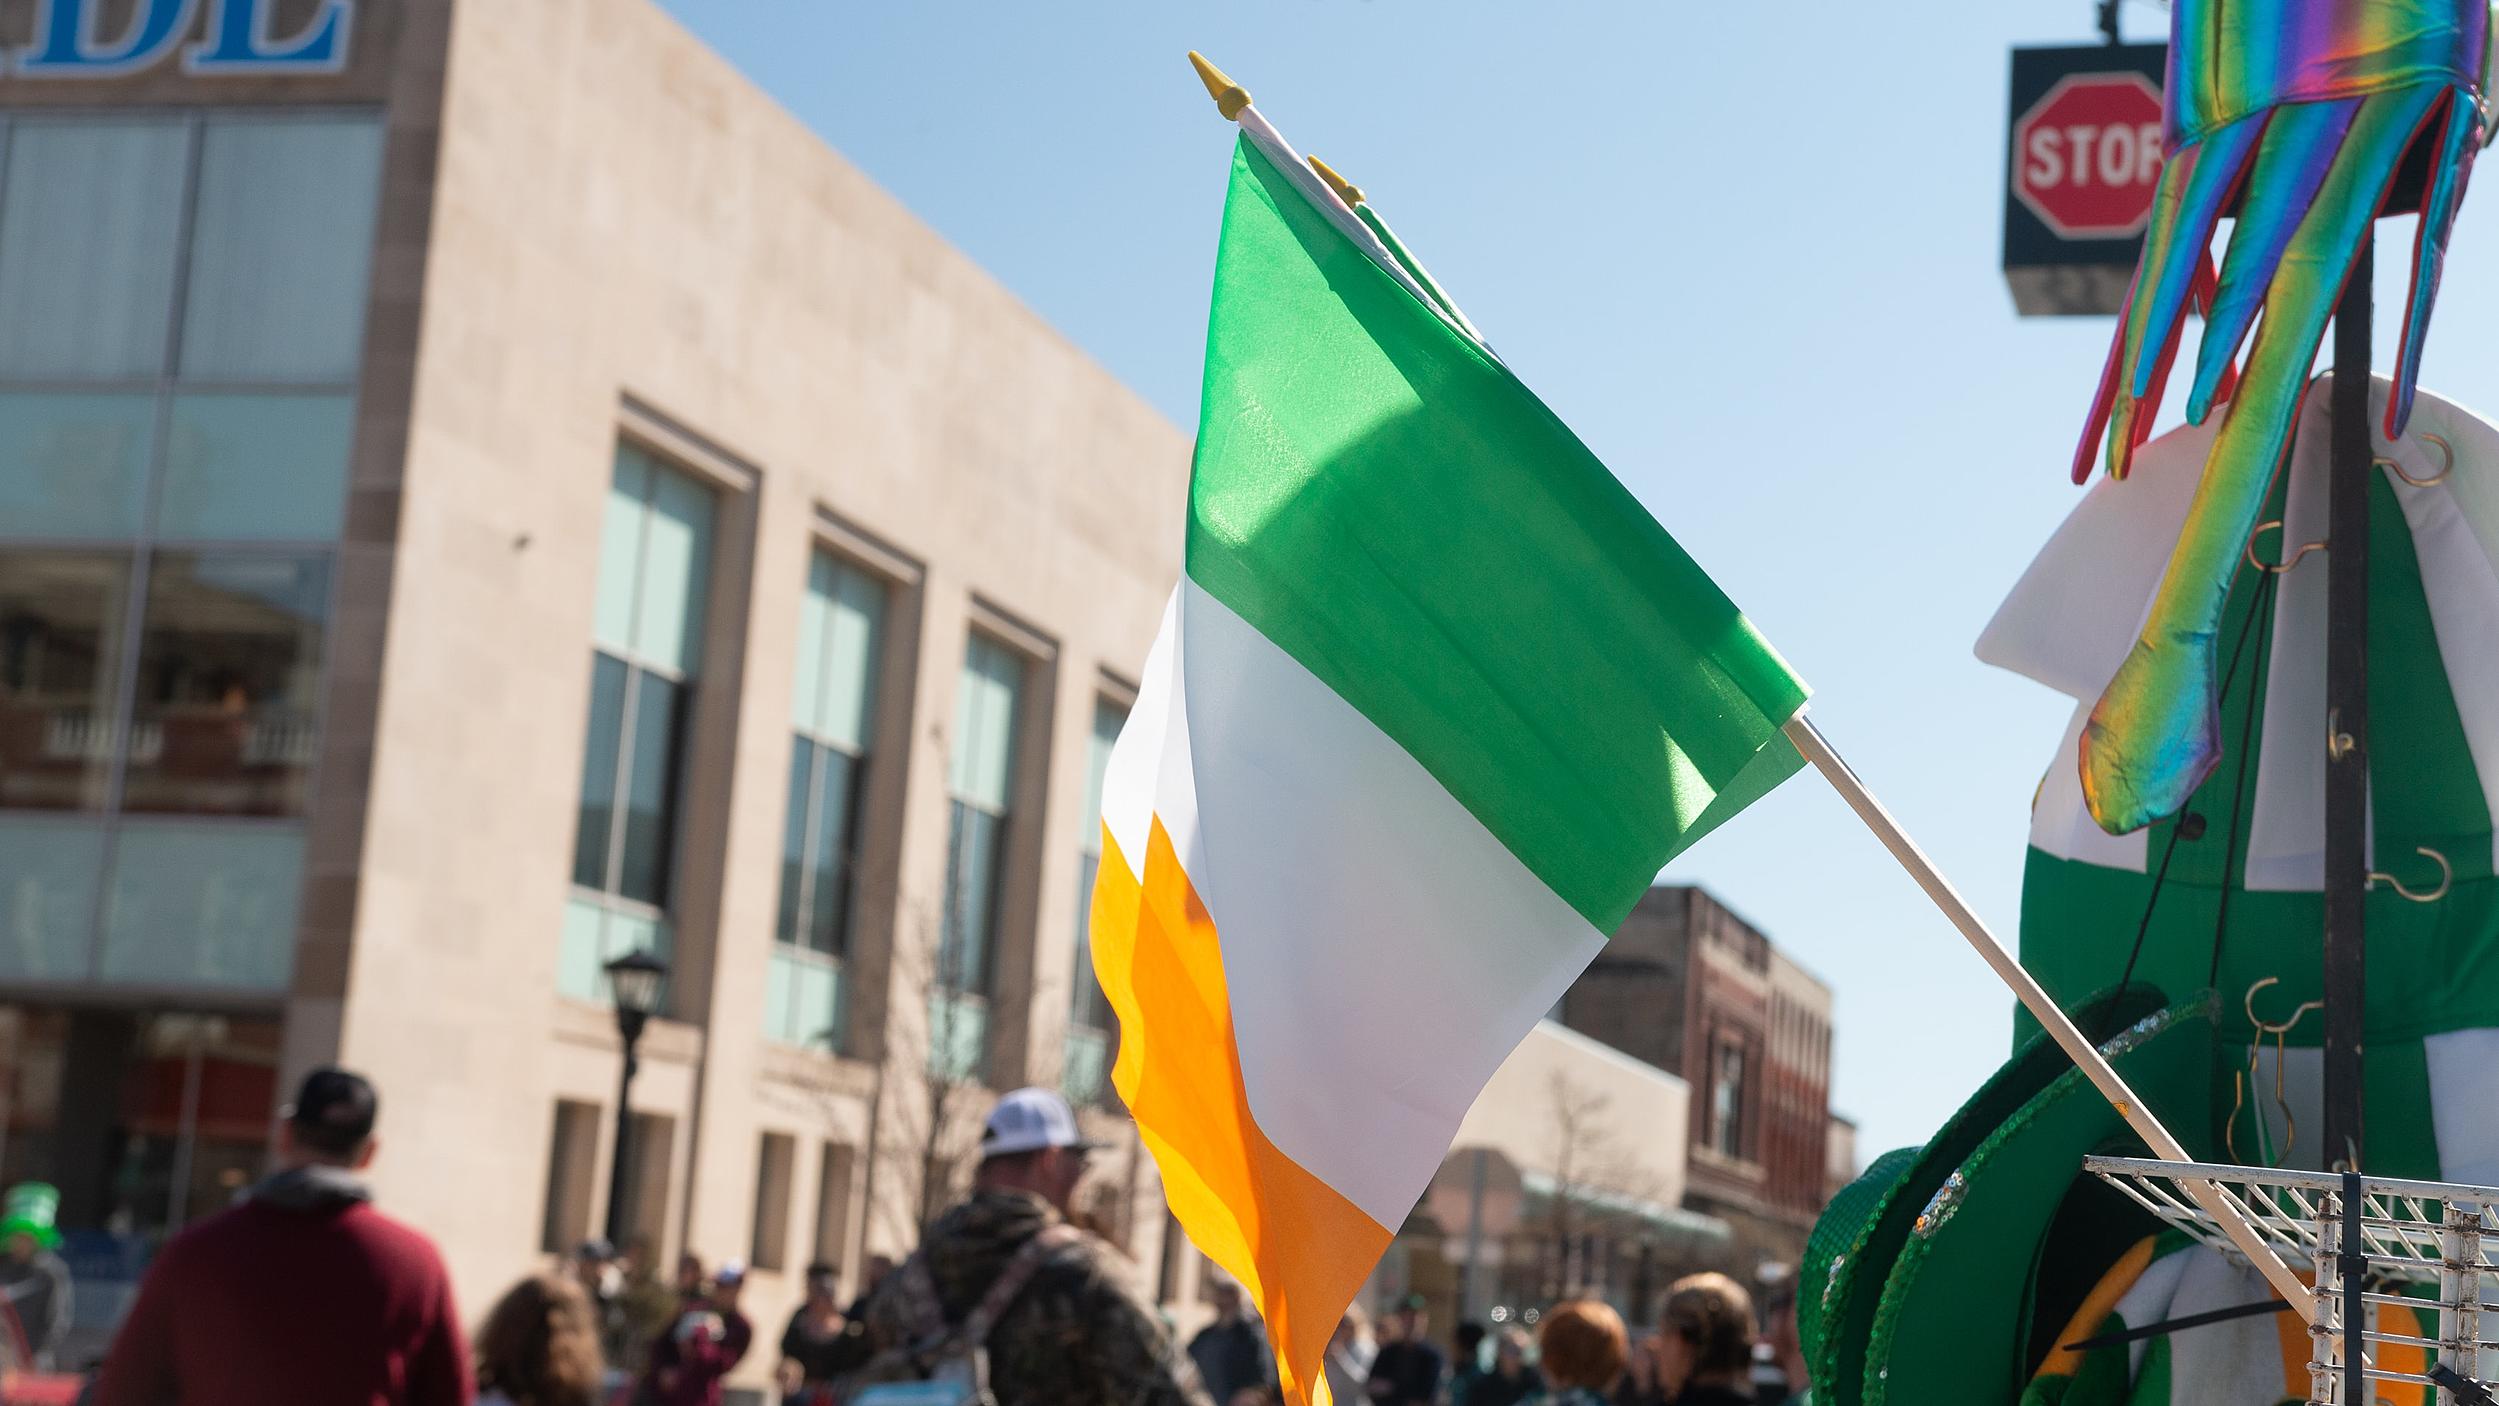 City of St. Louis Flag - St. Patrick's Day